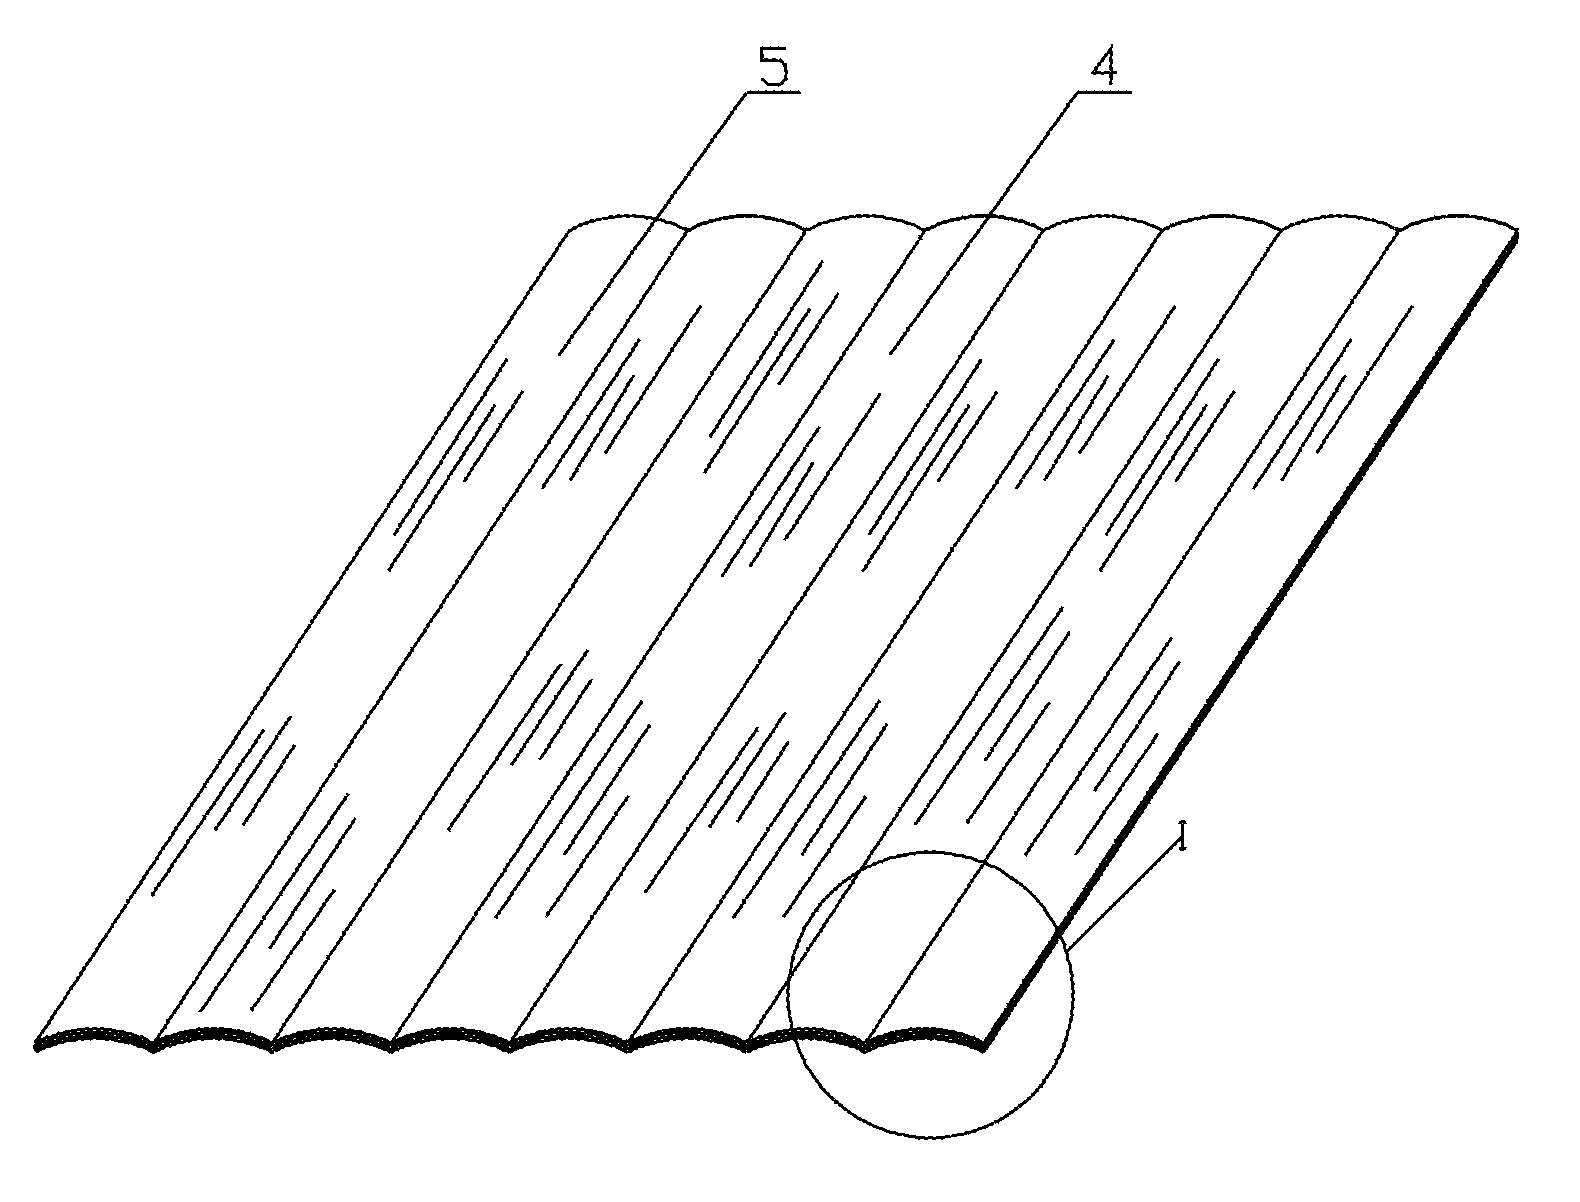 Method of making bamboo-surfaced layered Venetian blind slats having a curved cross-section